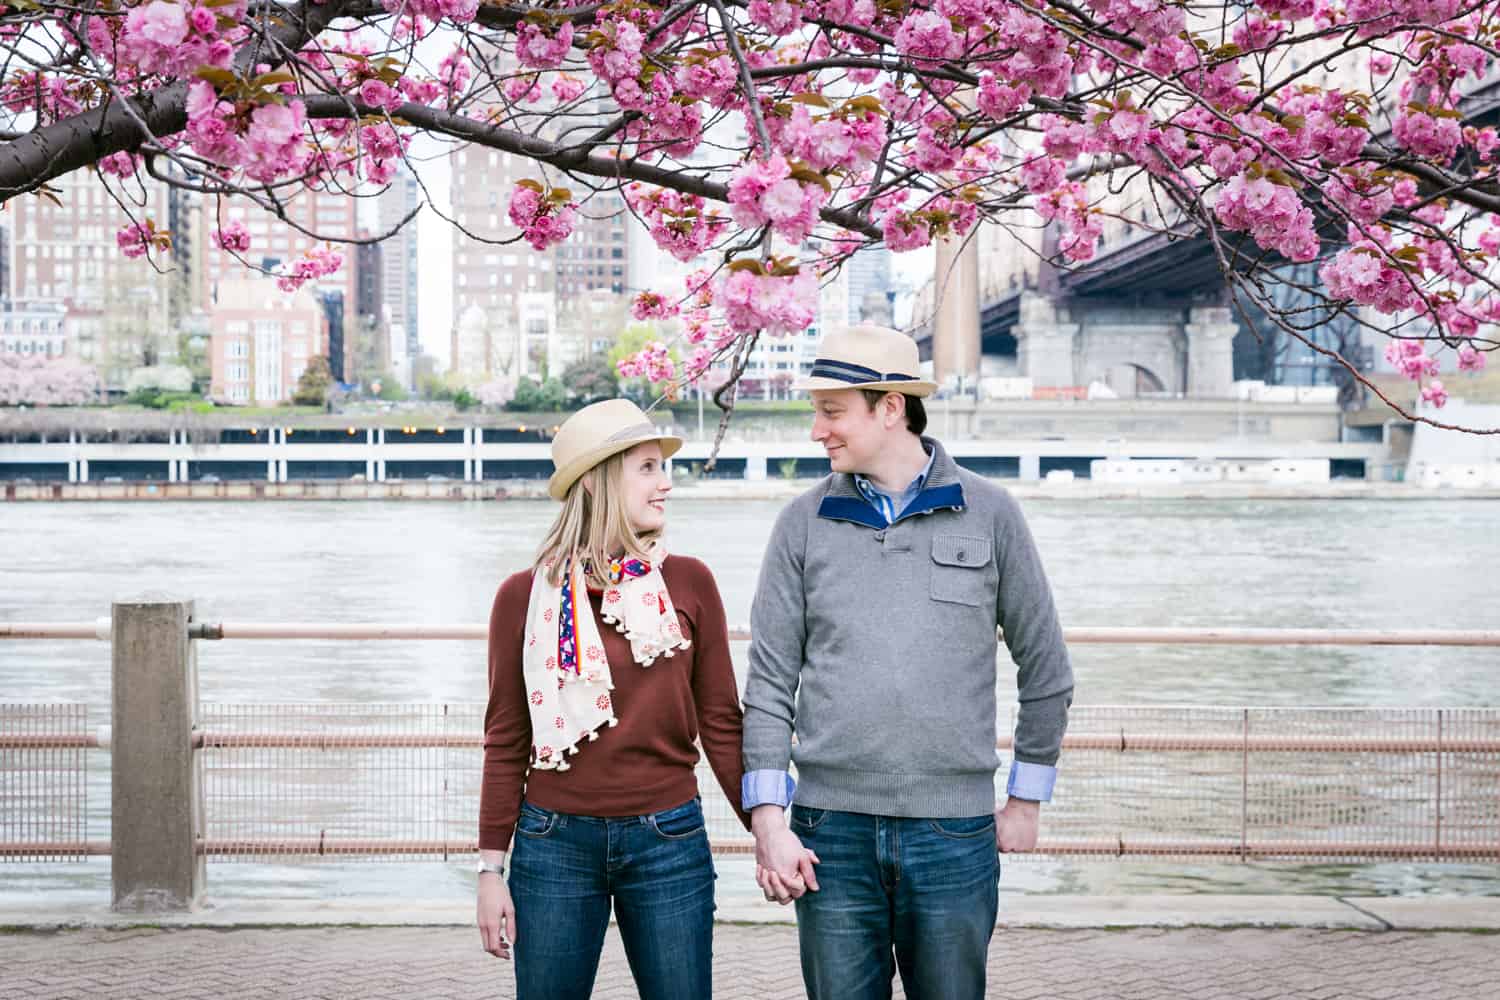 Couple holding hands under cherry blossom trees on Roosevelt Island for an article ranking the best places to see cherry blossoms in NYC